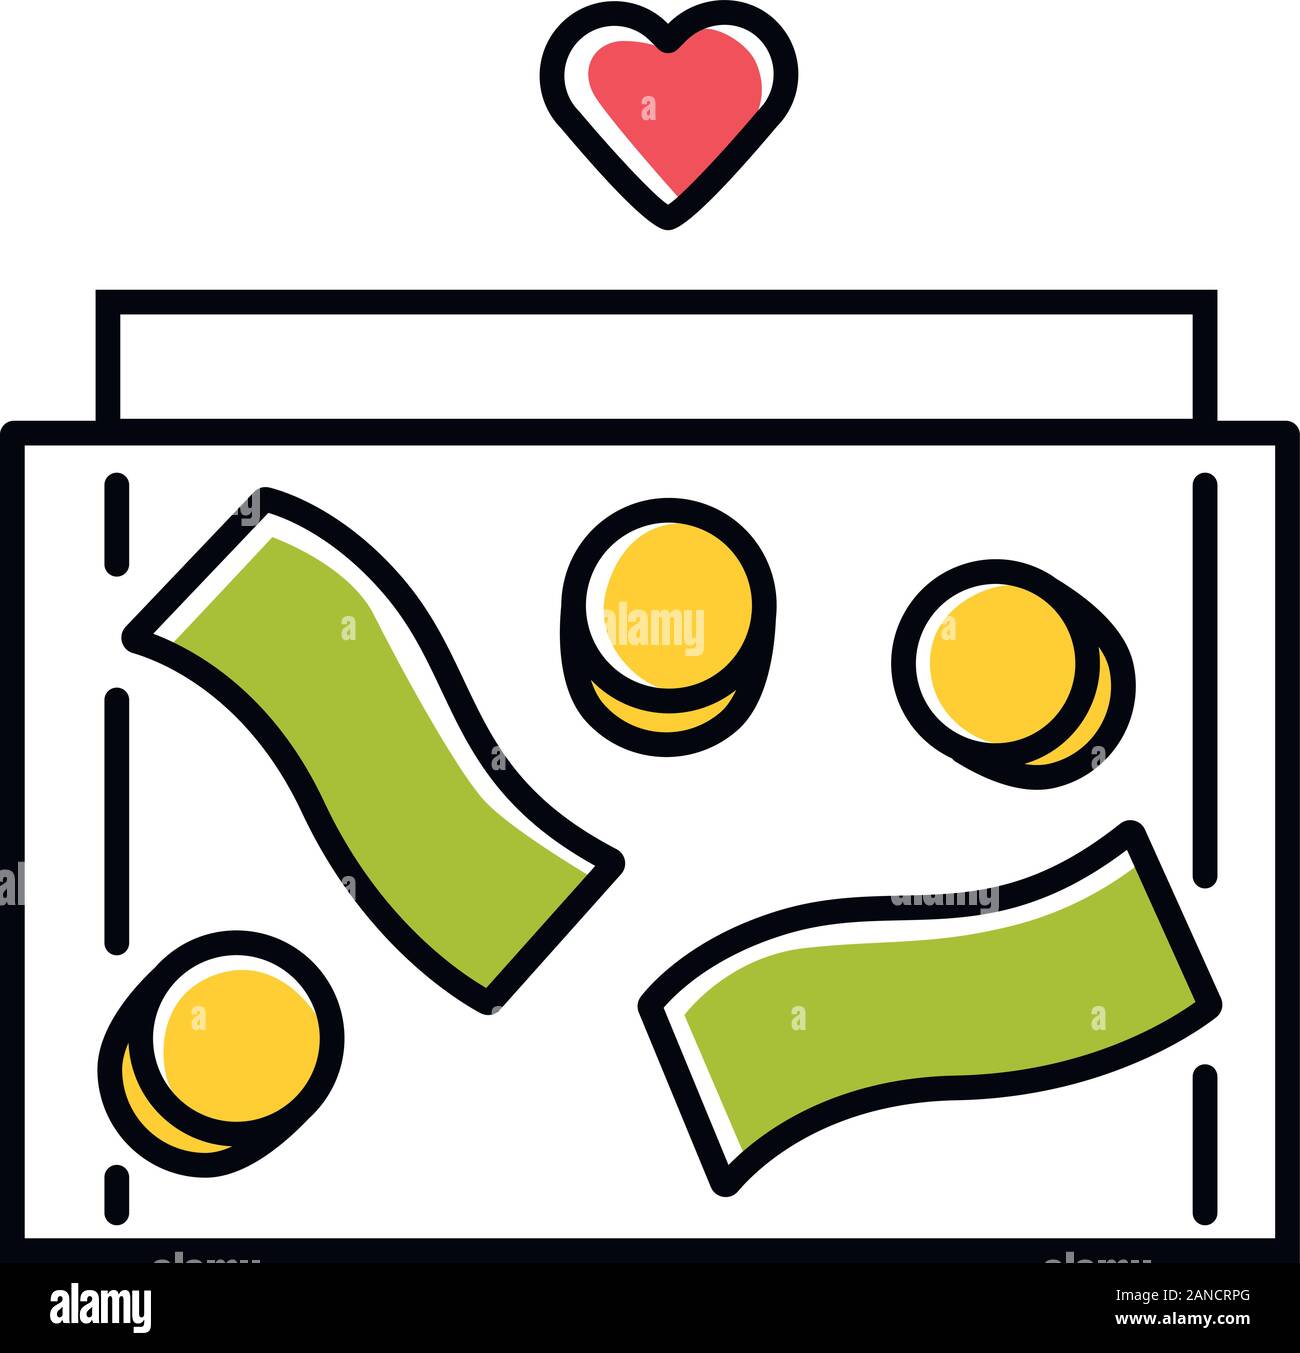 Donation box color icon. Collecting box with banknotes, coins. Moneybox. Charity fundraising. Receptacle for receiving donations. Container for money. Stock Vector